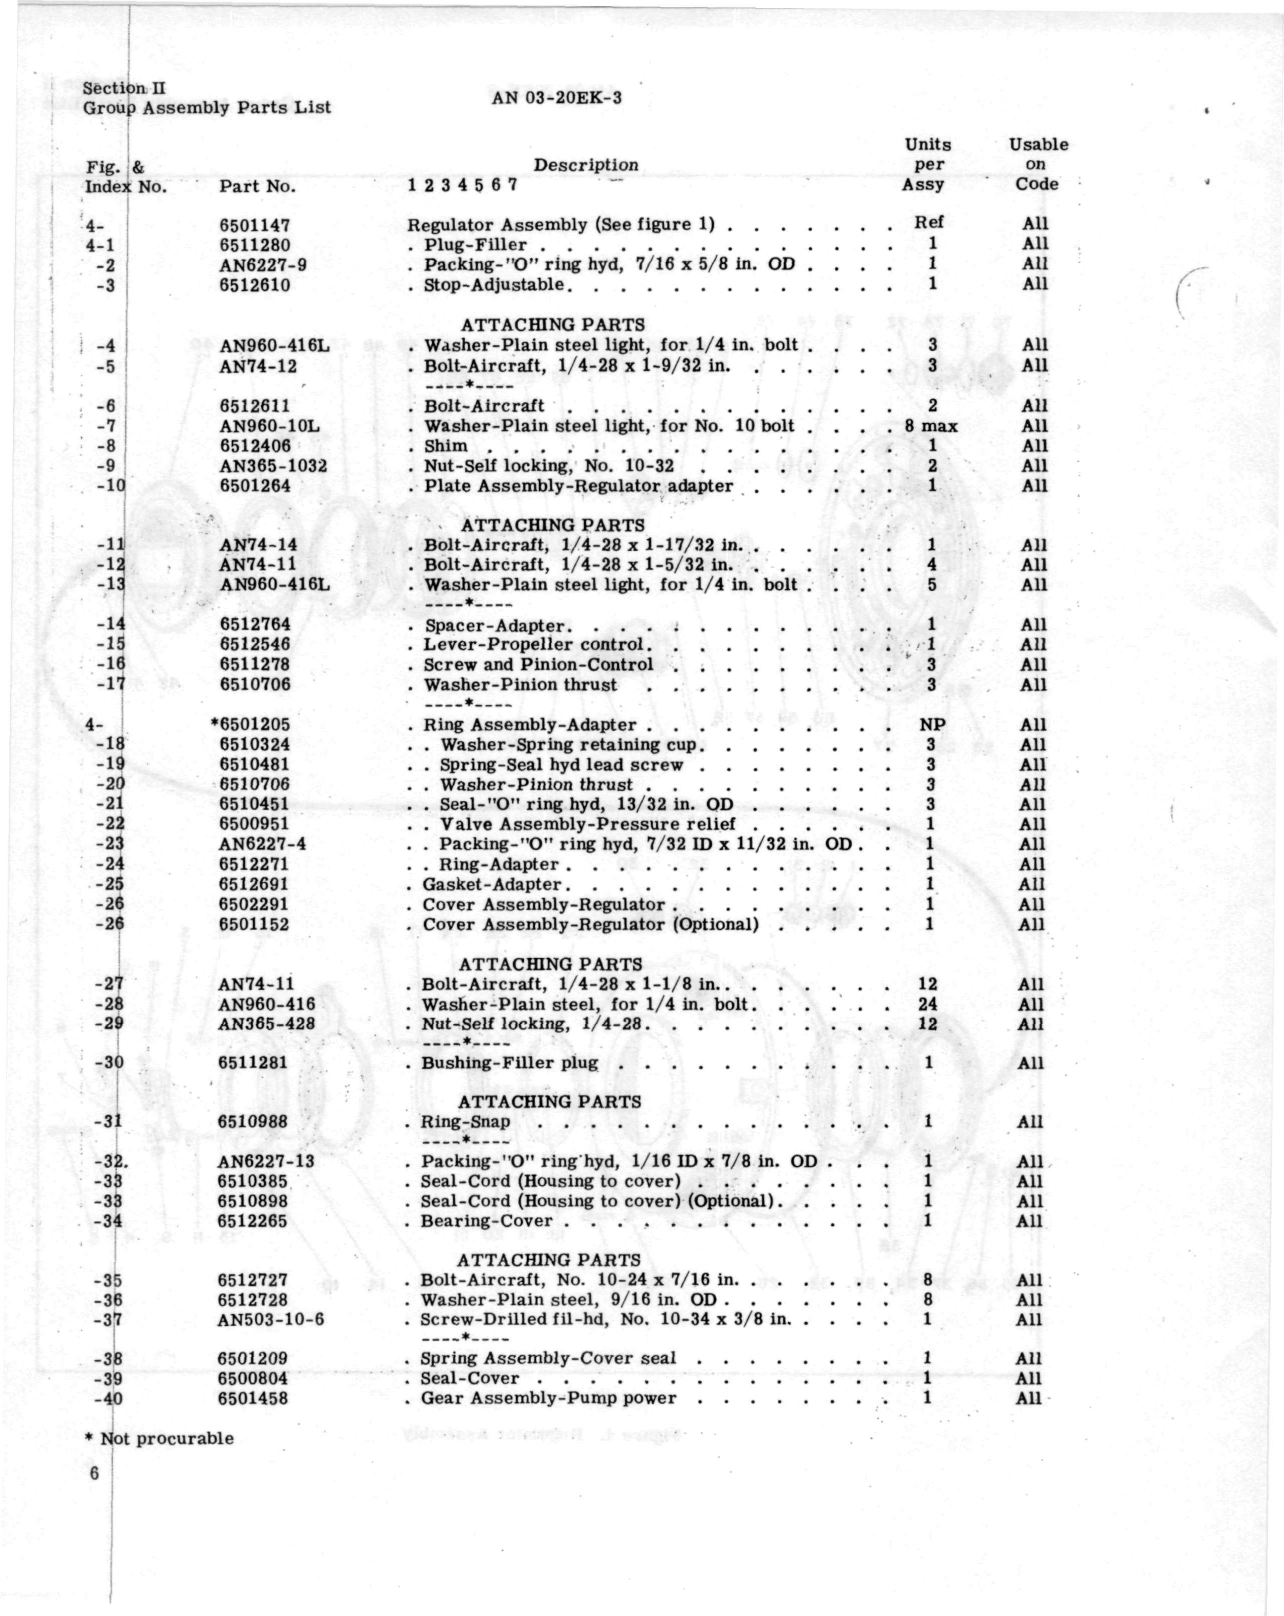 Sample page 8 from AirCorps Library document: Hydraulic Propeller Illustrated Parts Breakdown Model A422-E1